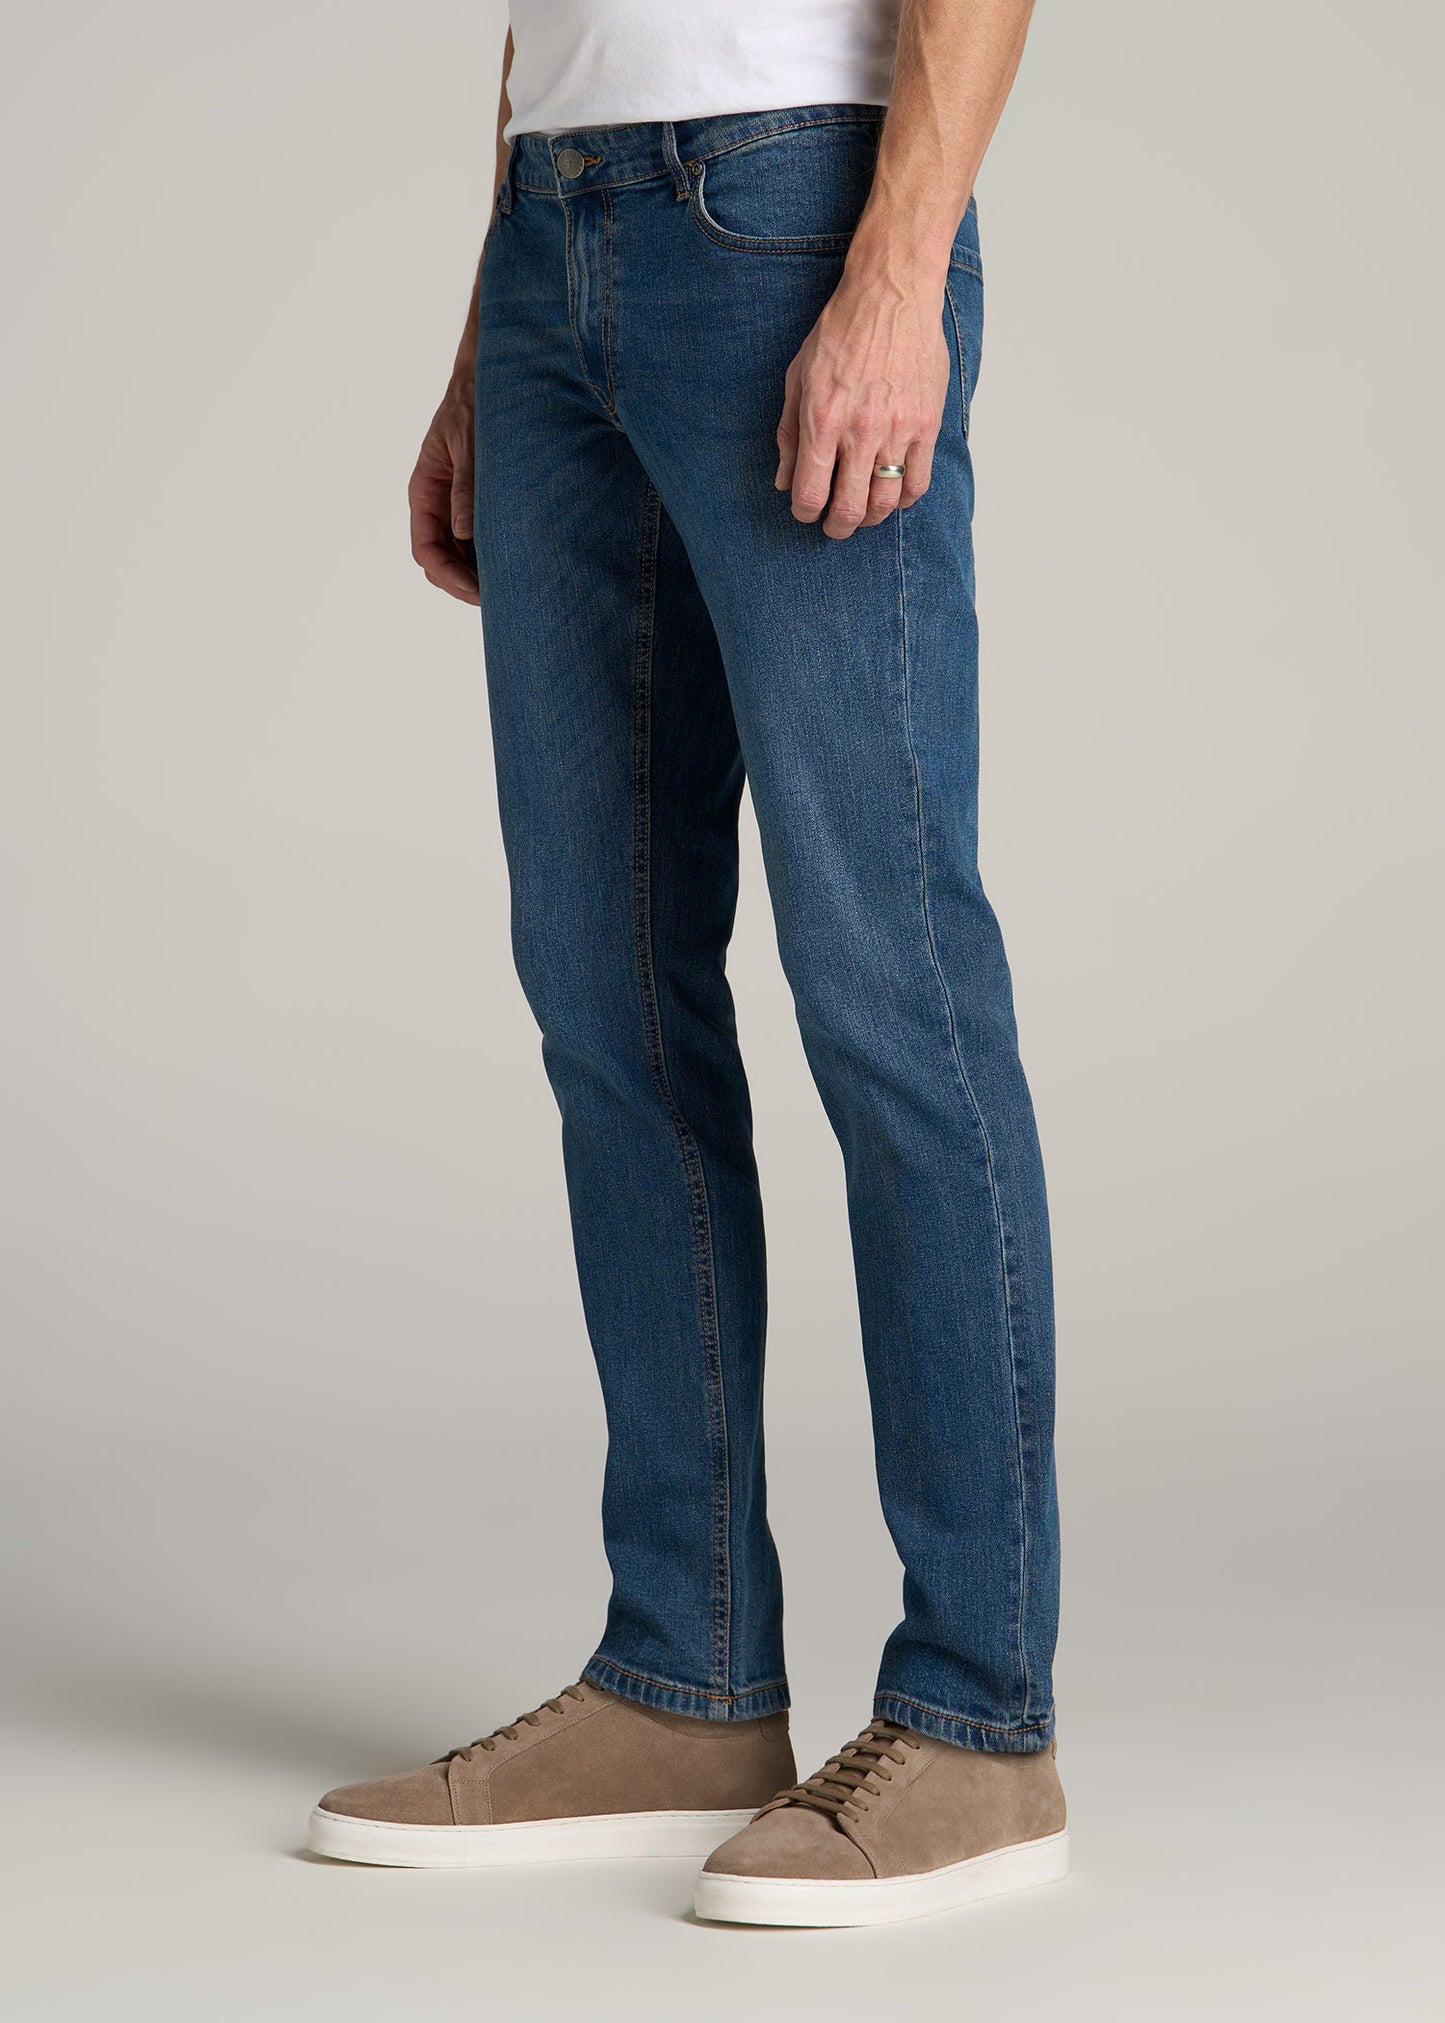 Carman TAPERED Jeans for Tall Men in Worn Blue